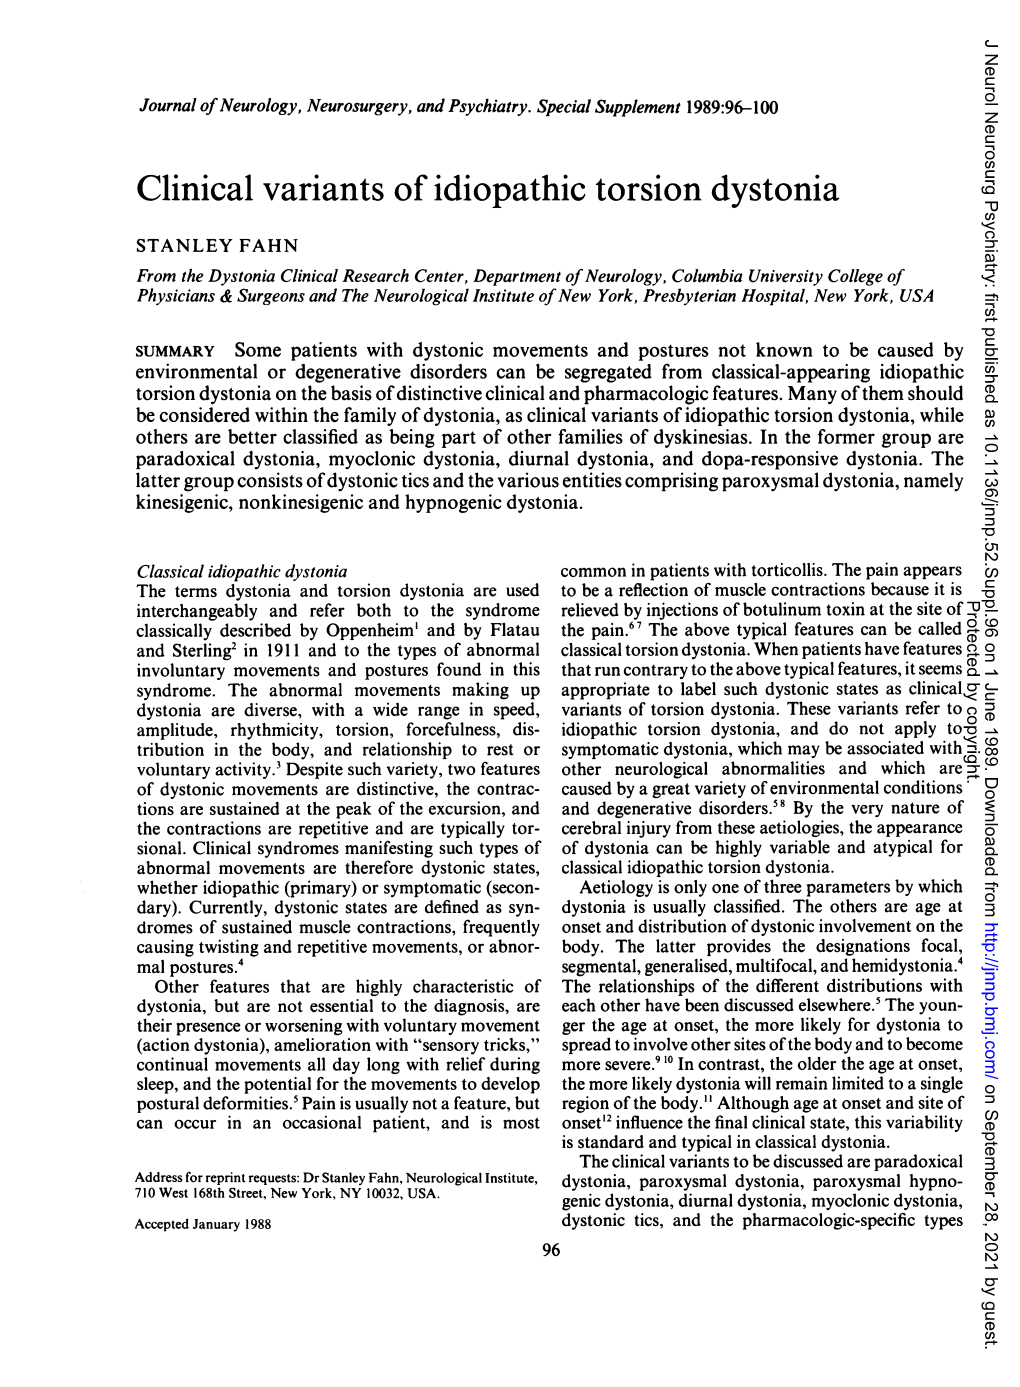 Clinical Variants of Idiopathic Torsion Dystonia